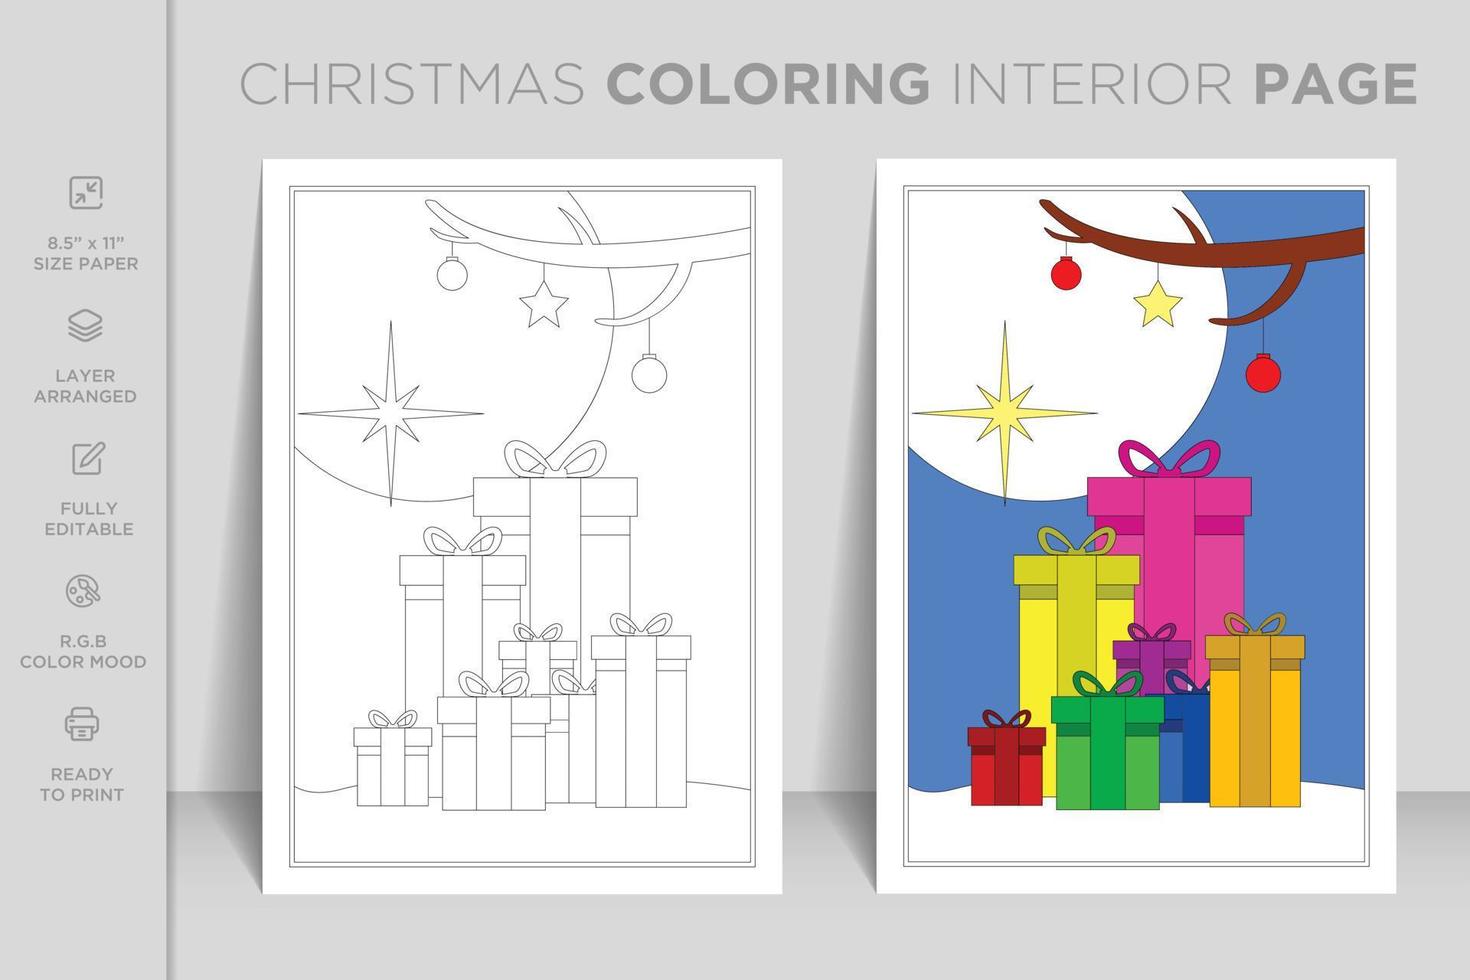 Ready to print complete Christmas coloring book interior page vector